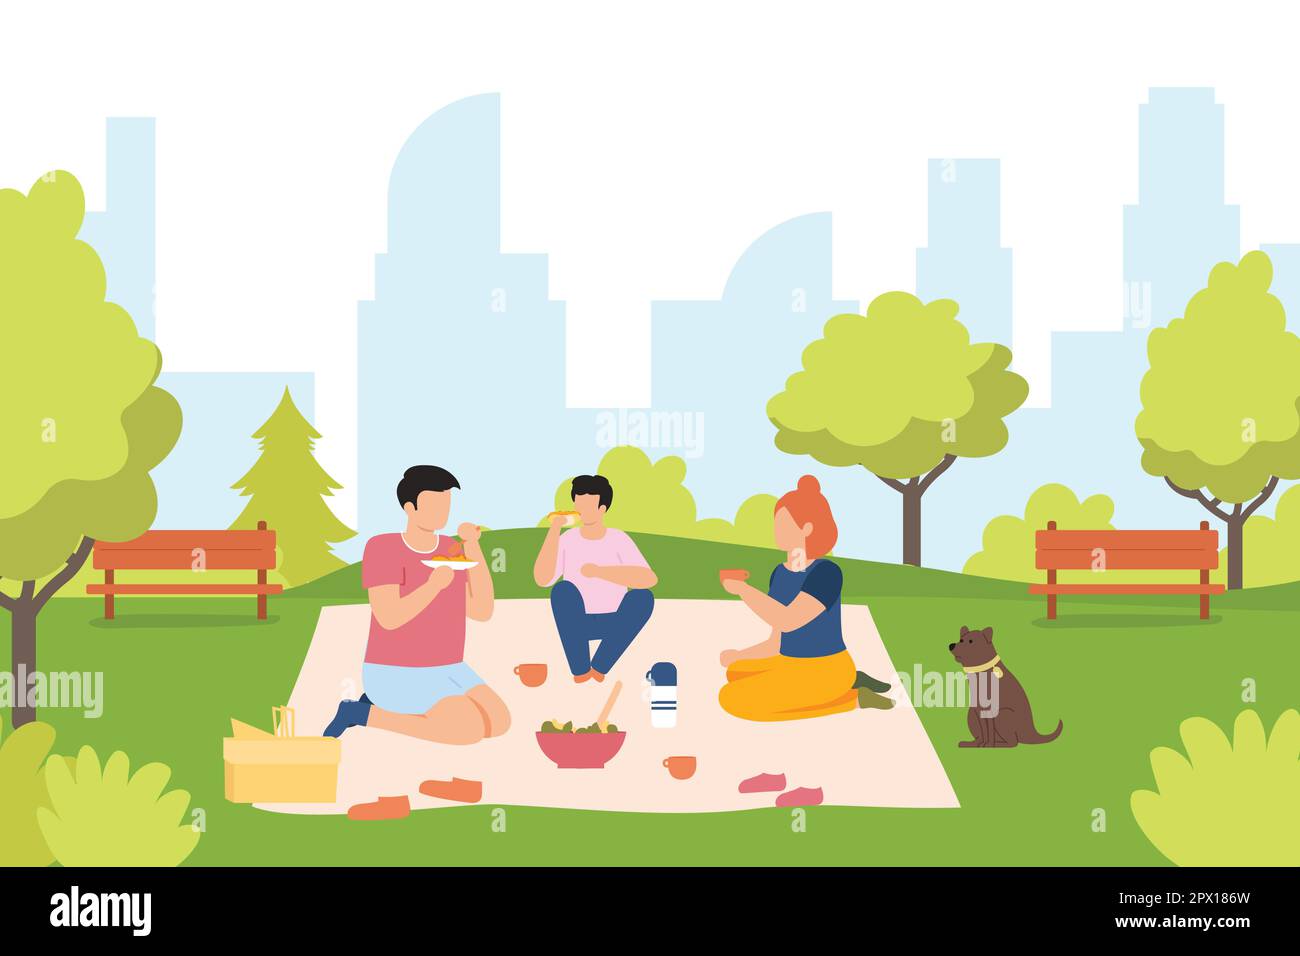 Picnic in park. Friends eating salad and drinking tea from thermos. Male and female characters spending leisure time together. Young people chilling o Stock Vector